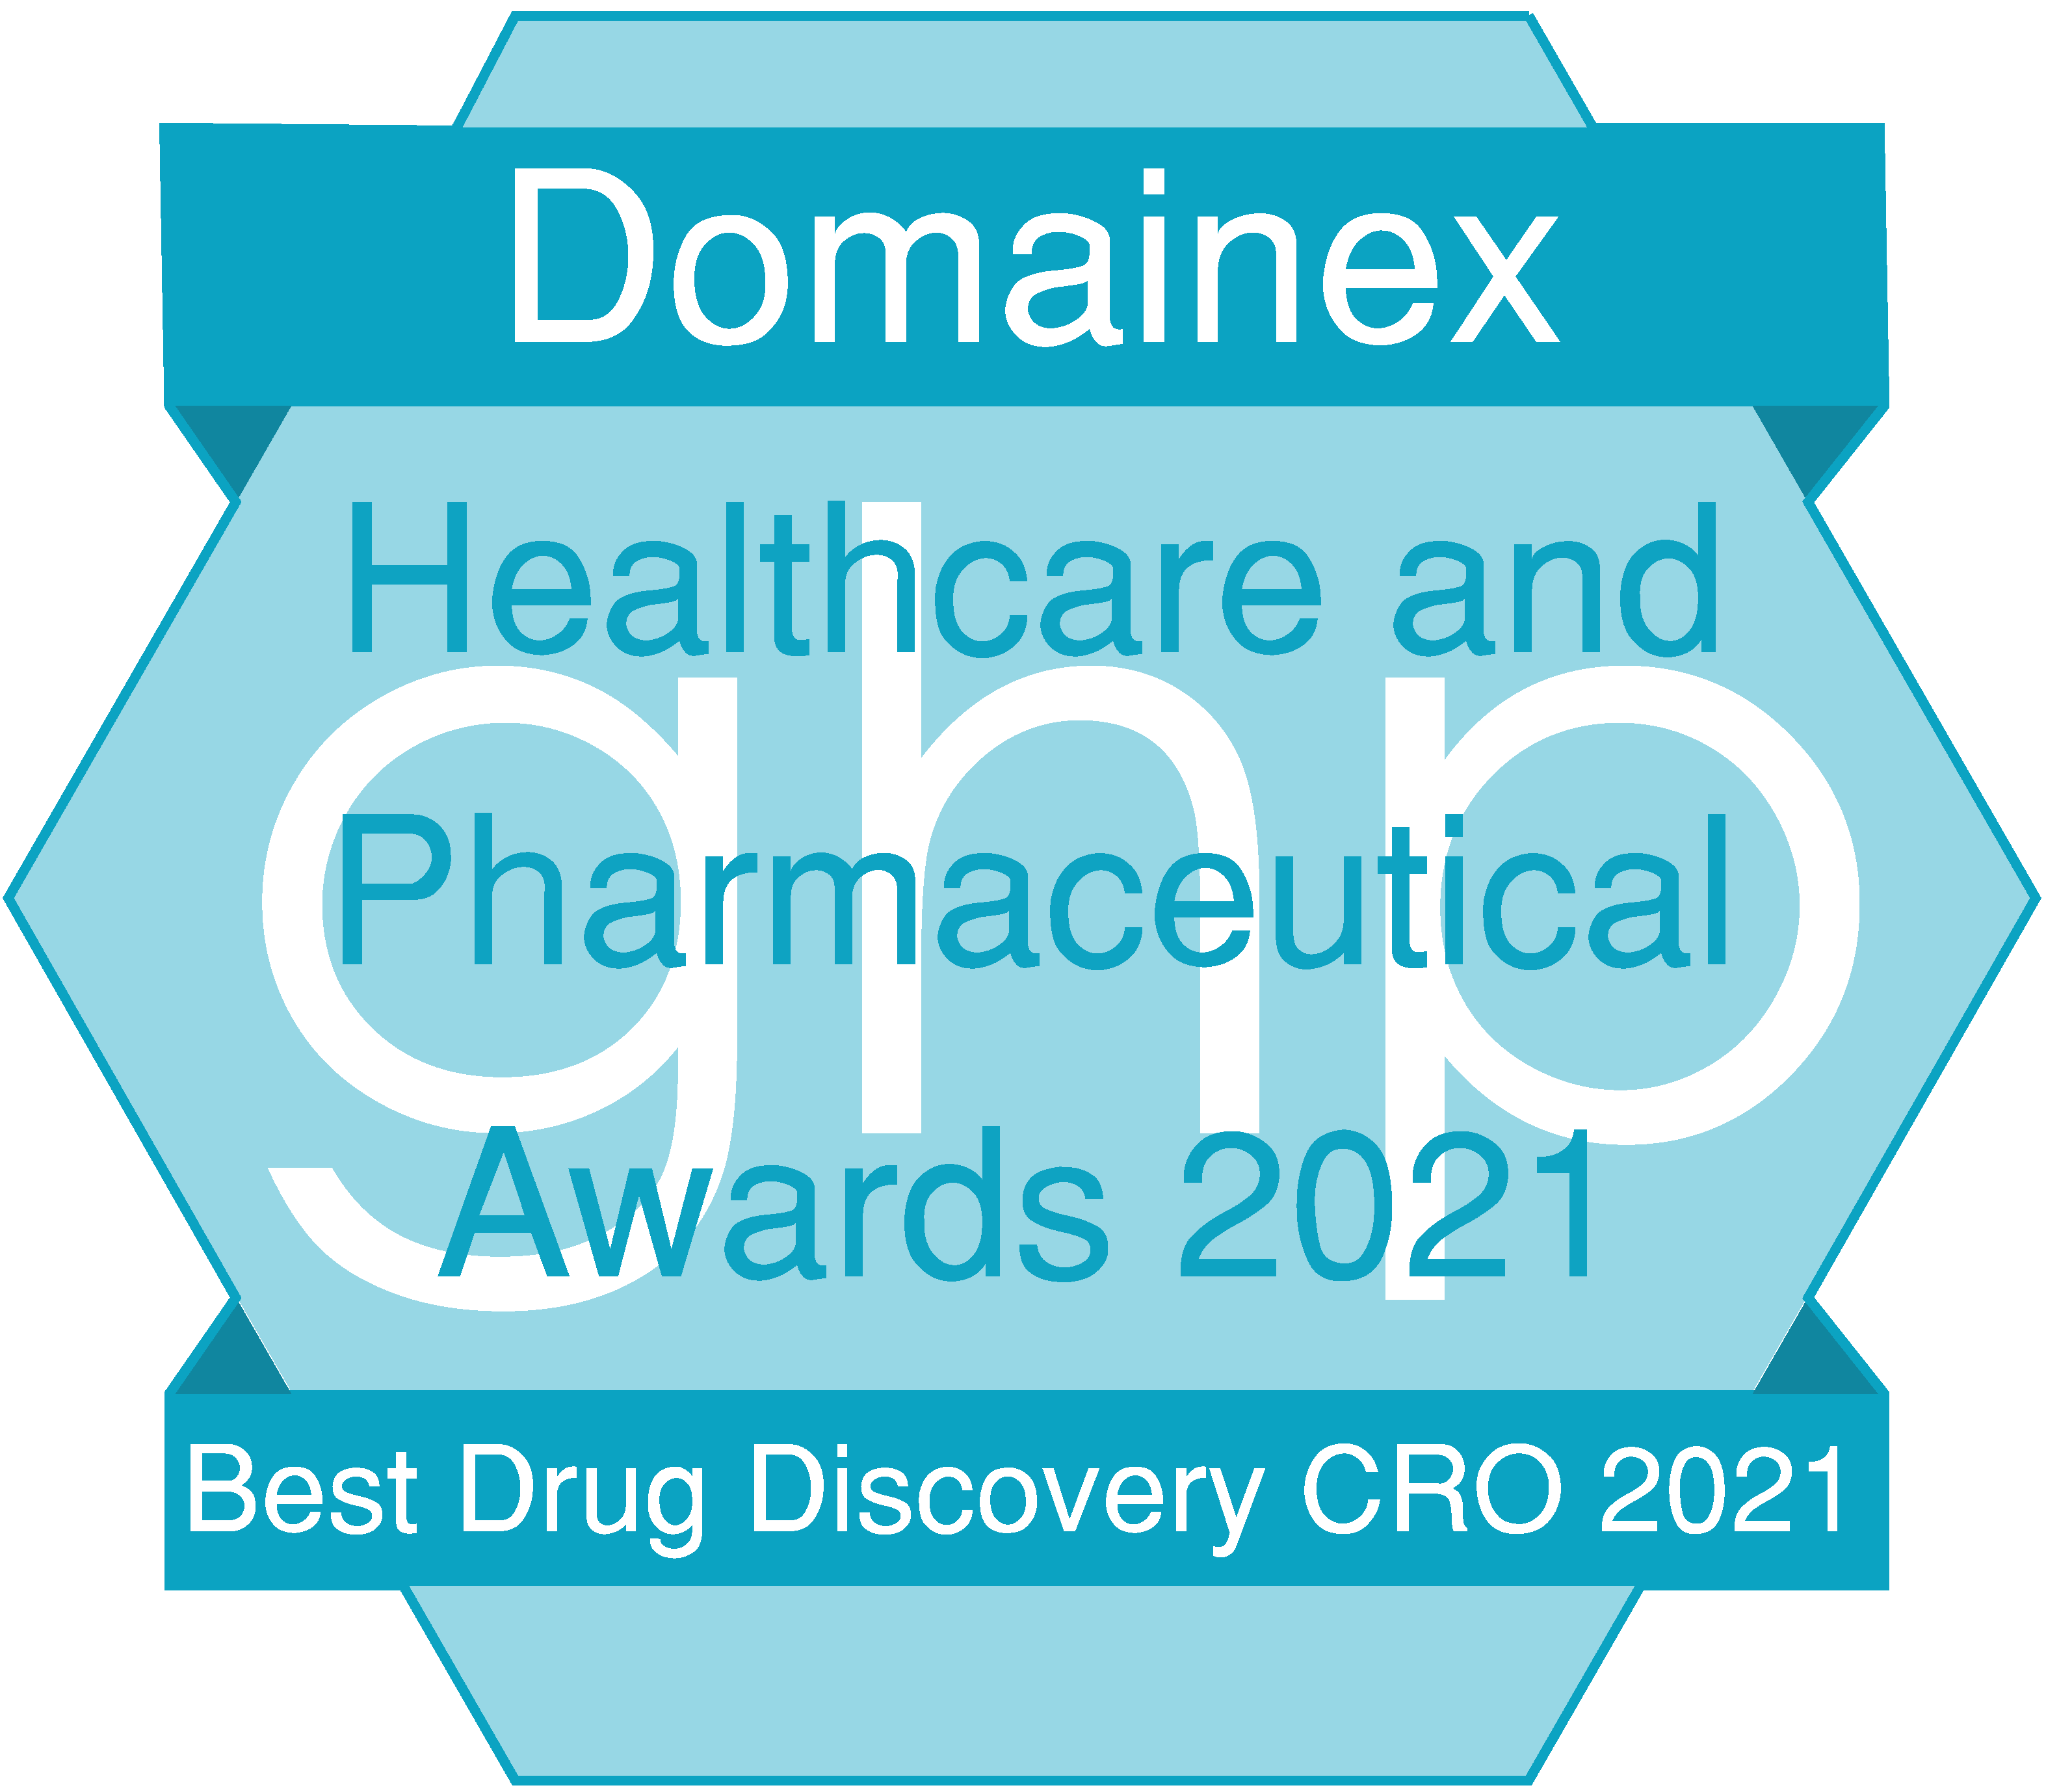 Best Drug Discovery CRO 2021